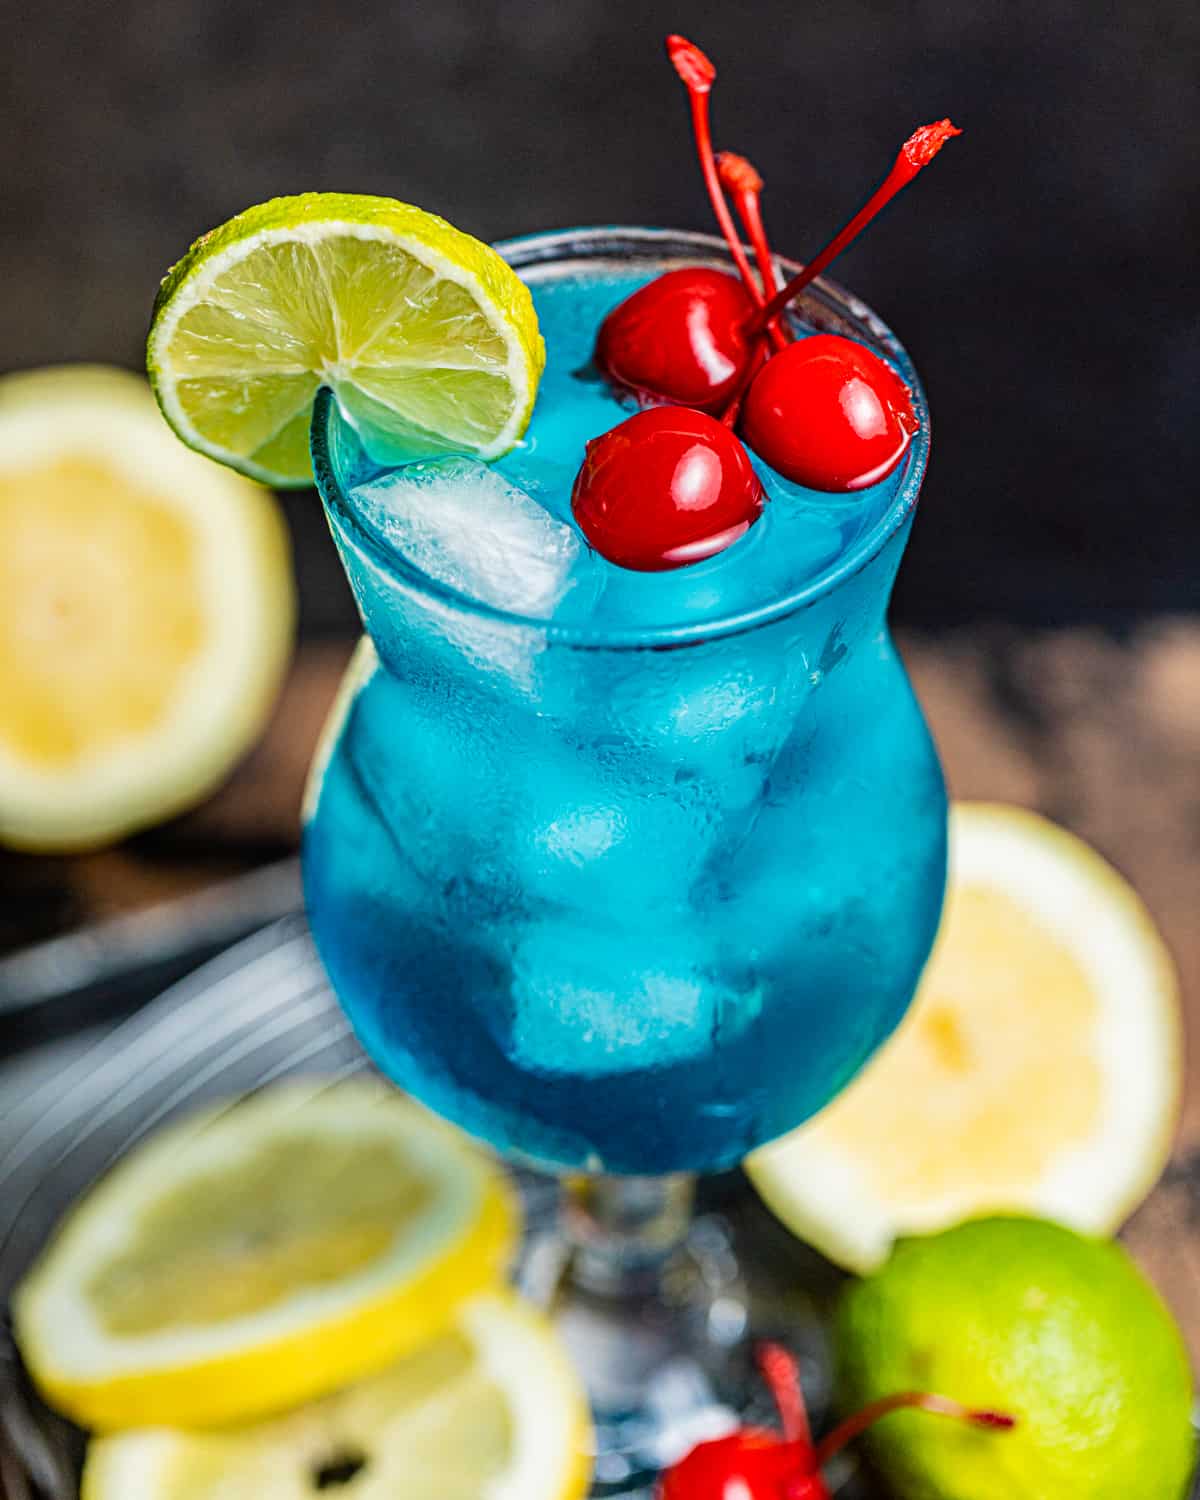 an up close photo of an AMF drink garnished with cherries and a lime wedge.